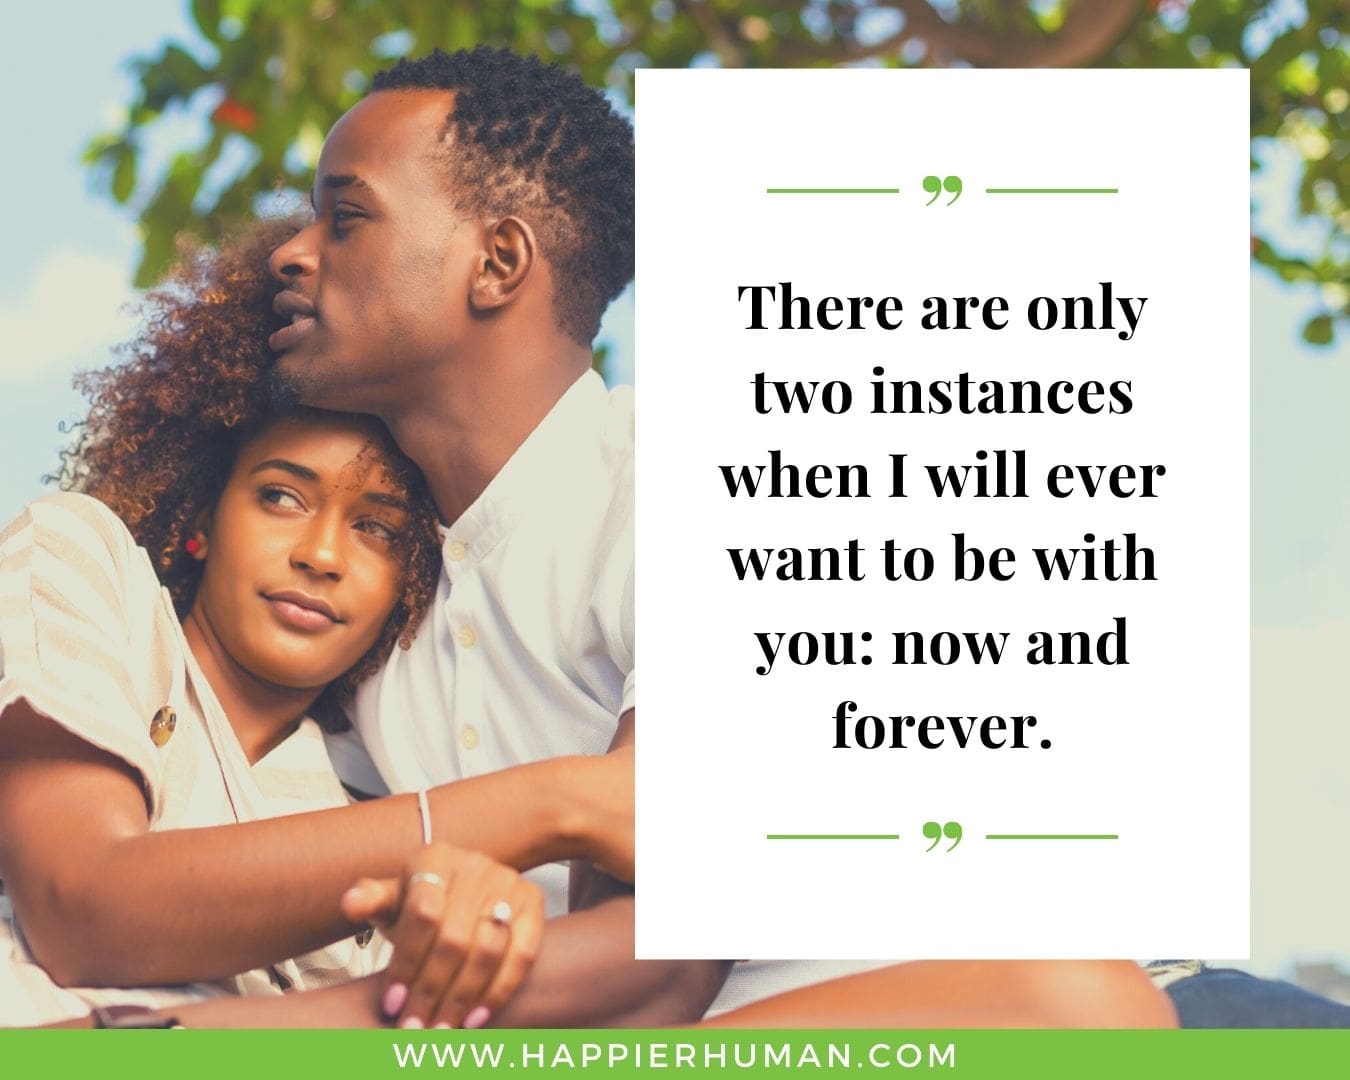 Sweet and Romantic Love Quotes for Her - “There are only two instances when I will ever want to be with you: now and forever.”